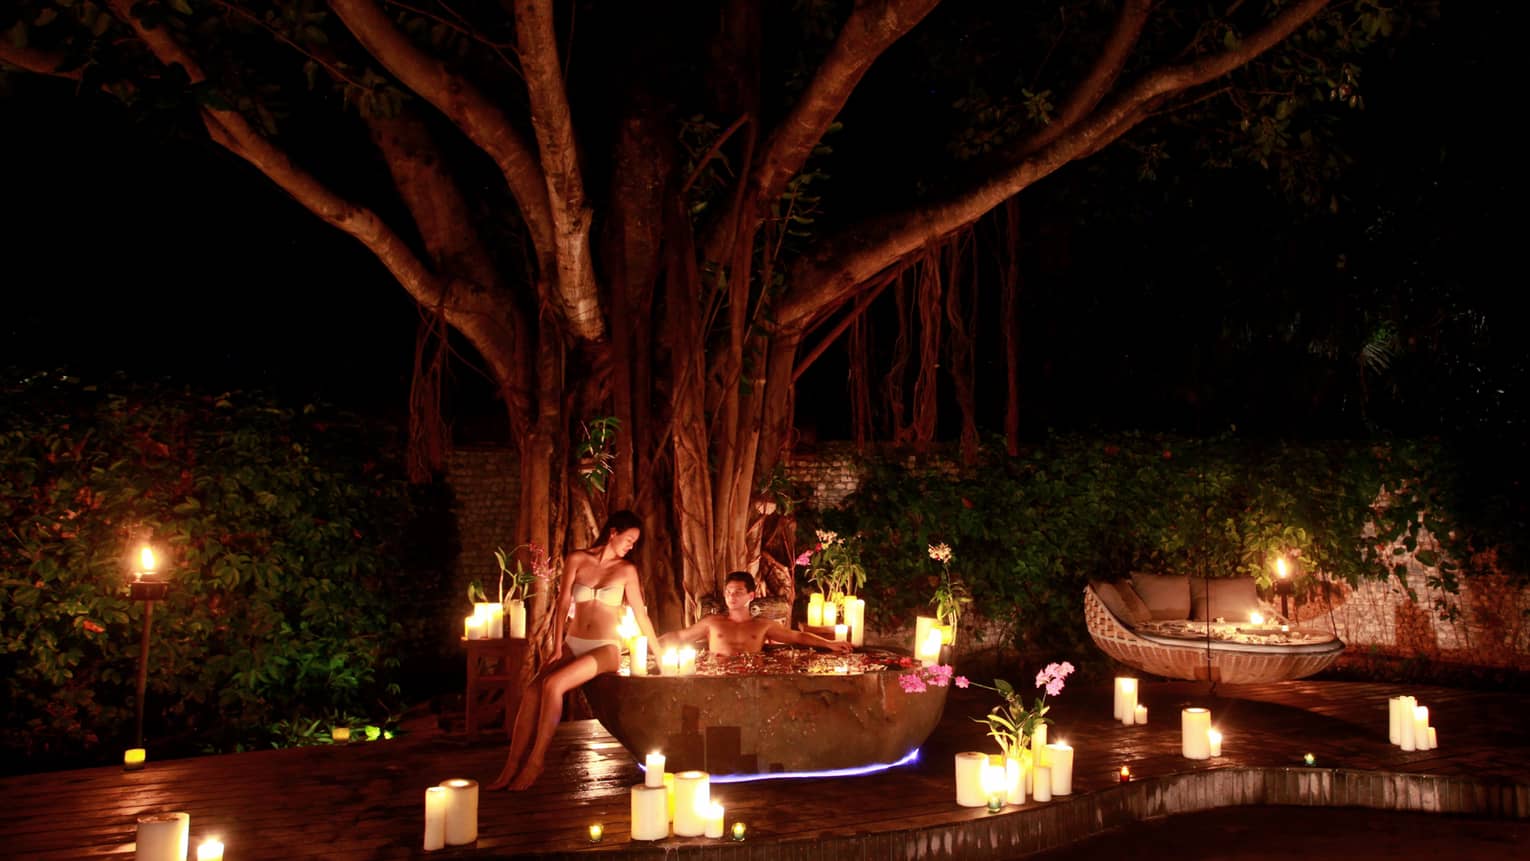 Man in outdoor whirlpool tub at night, woman in bikini on edge, surrounded by lit candles